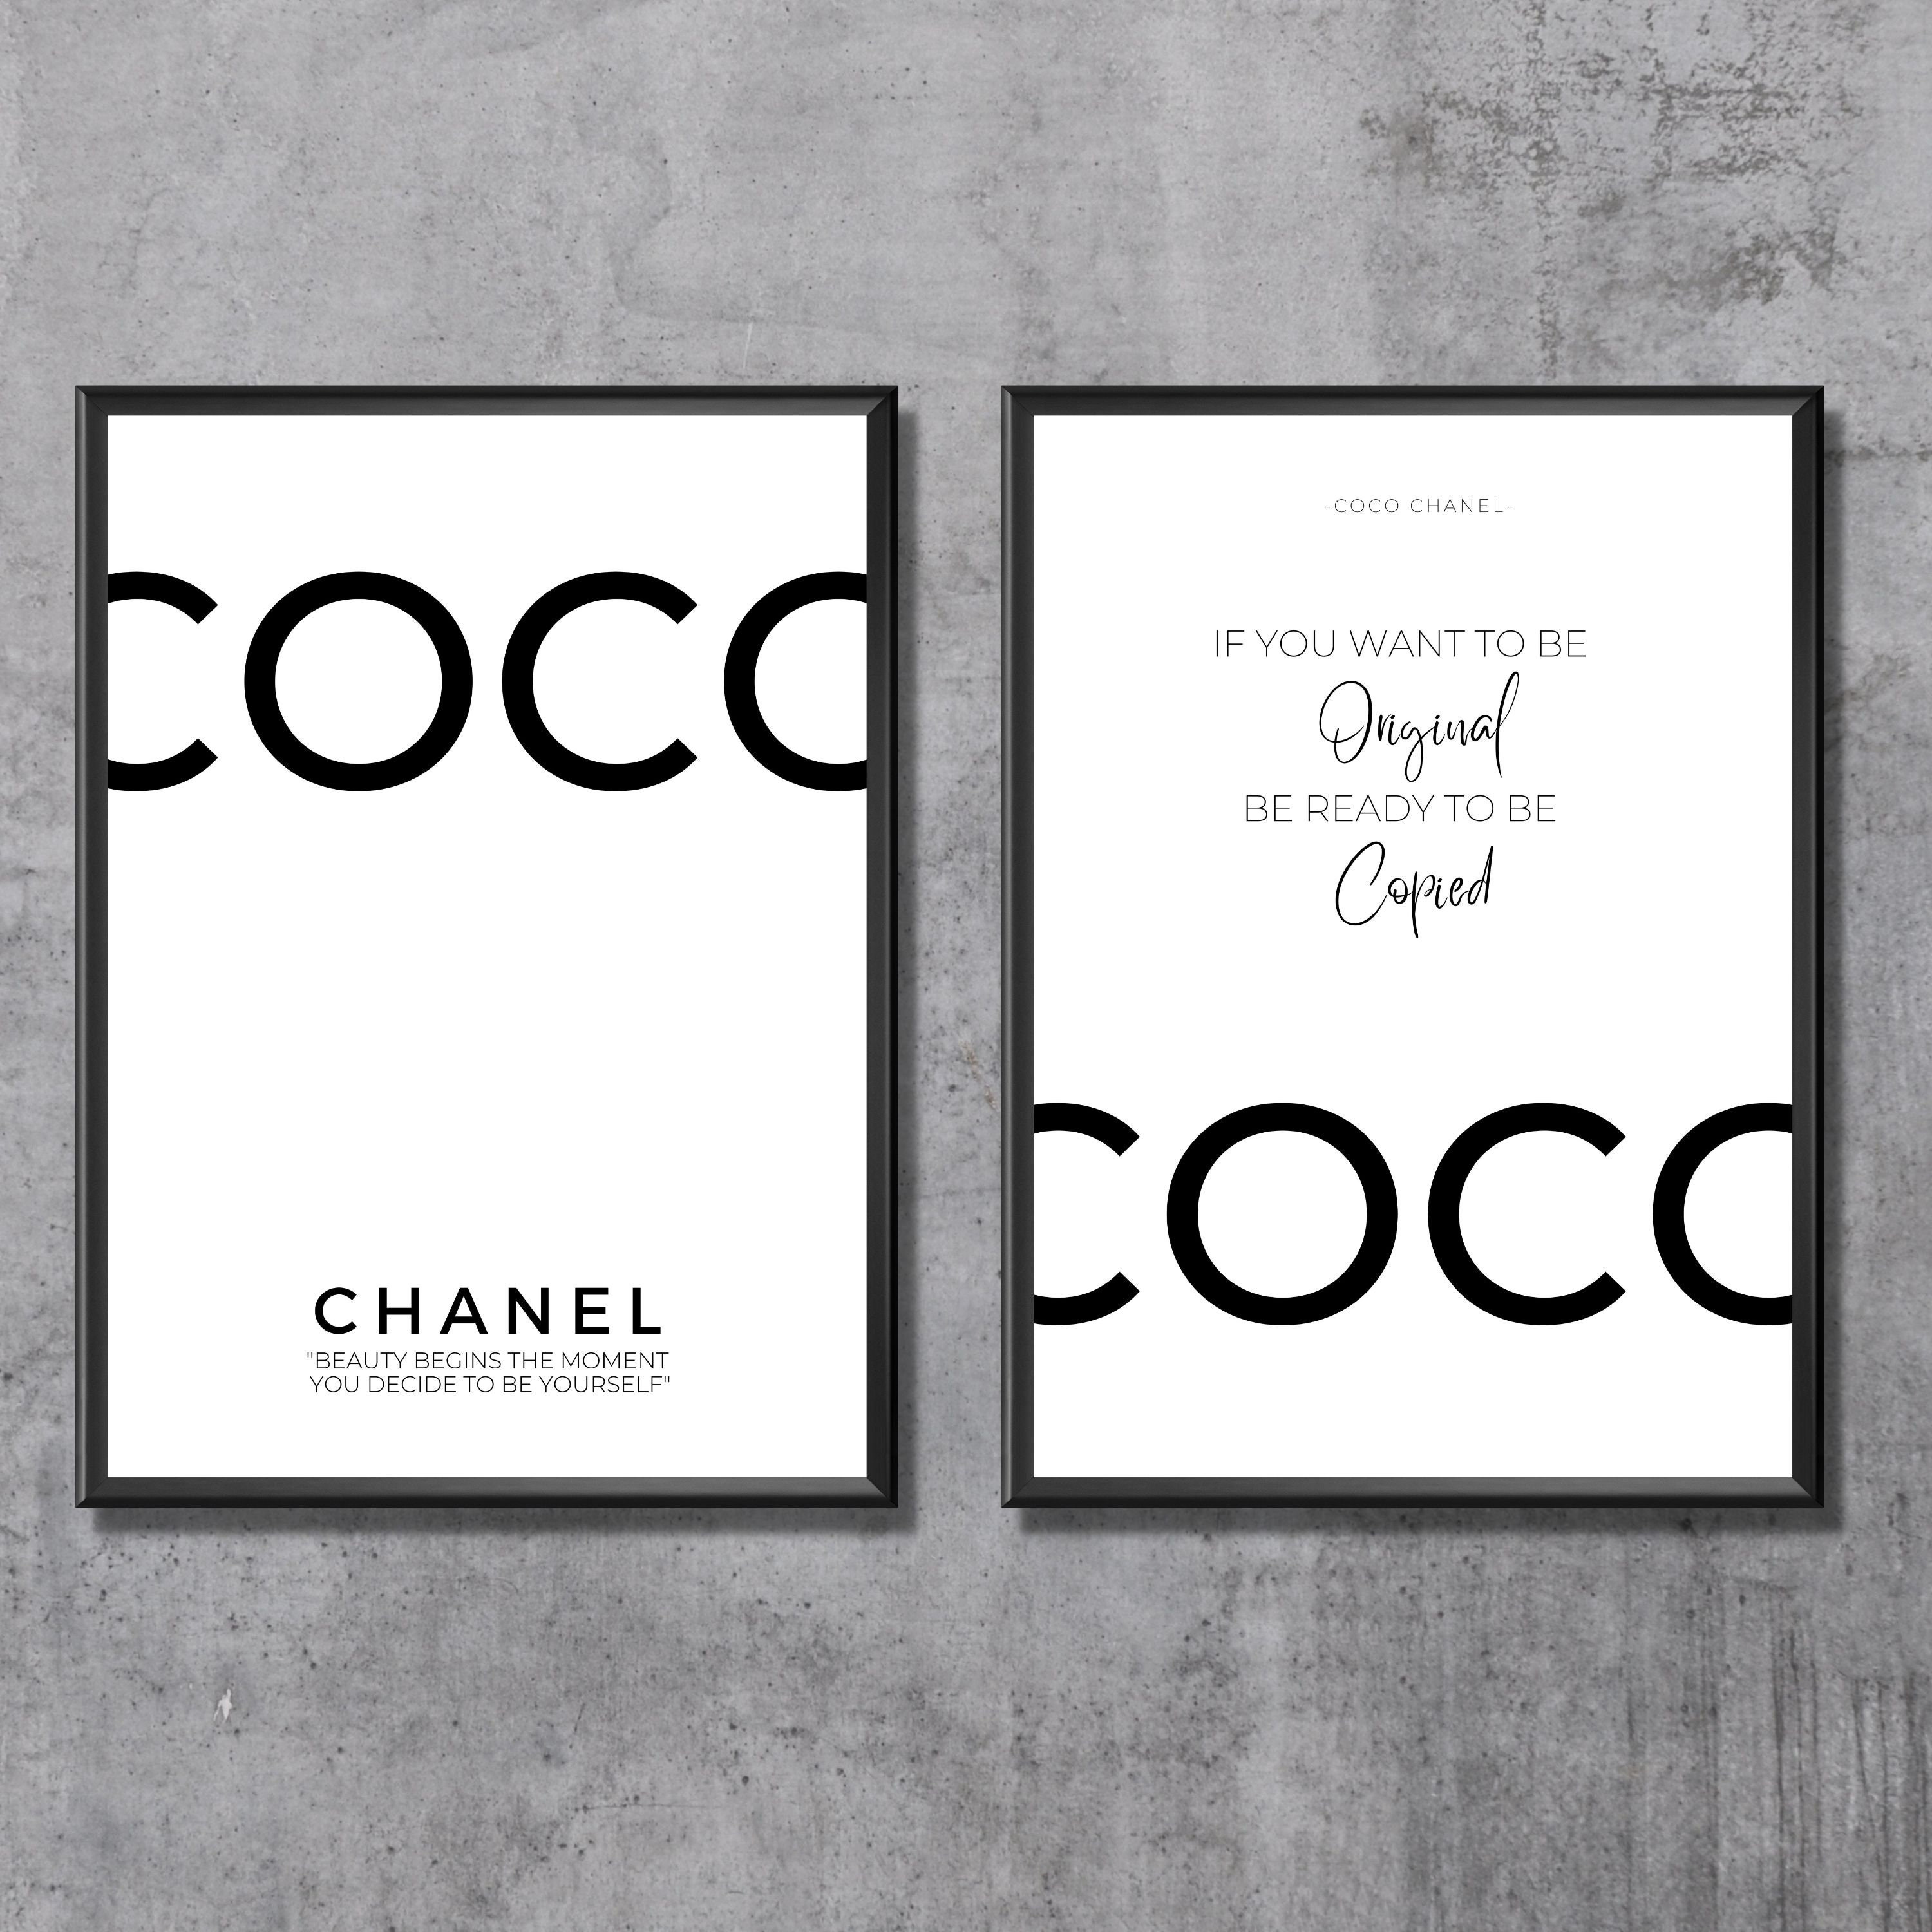 Coco Chanel Gallery Photo with Quote, rmhholiday21